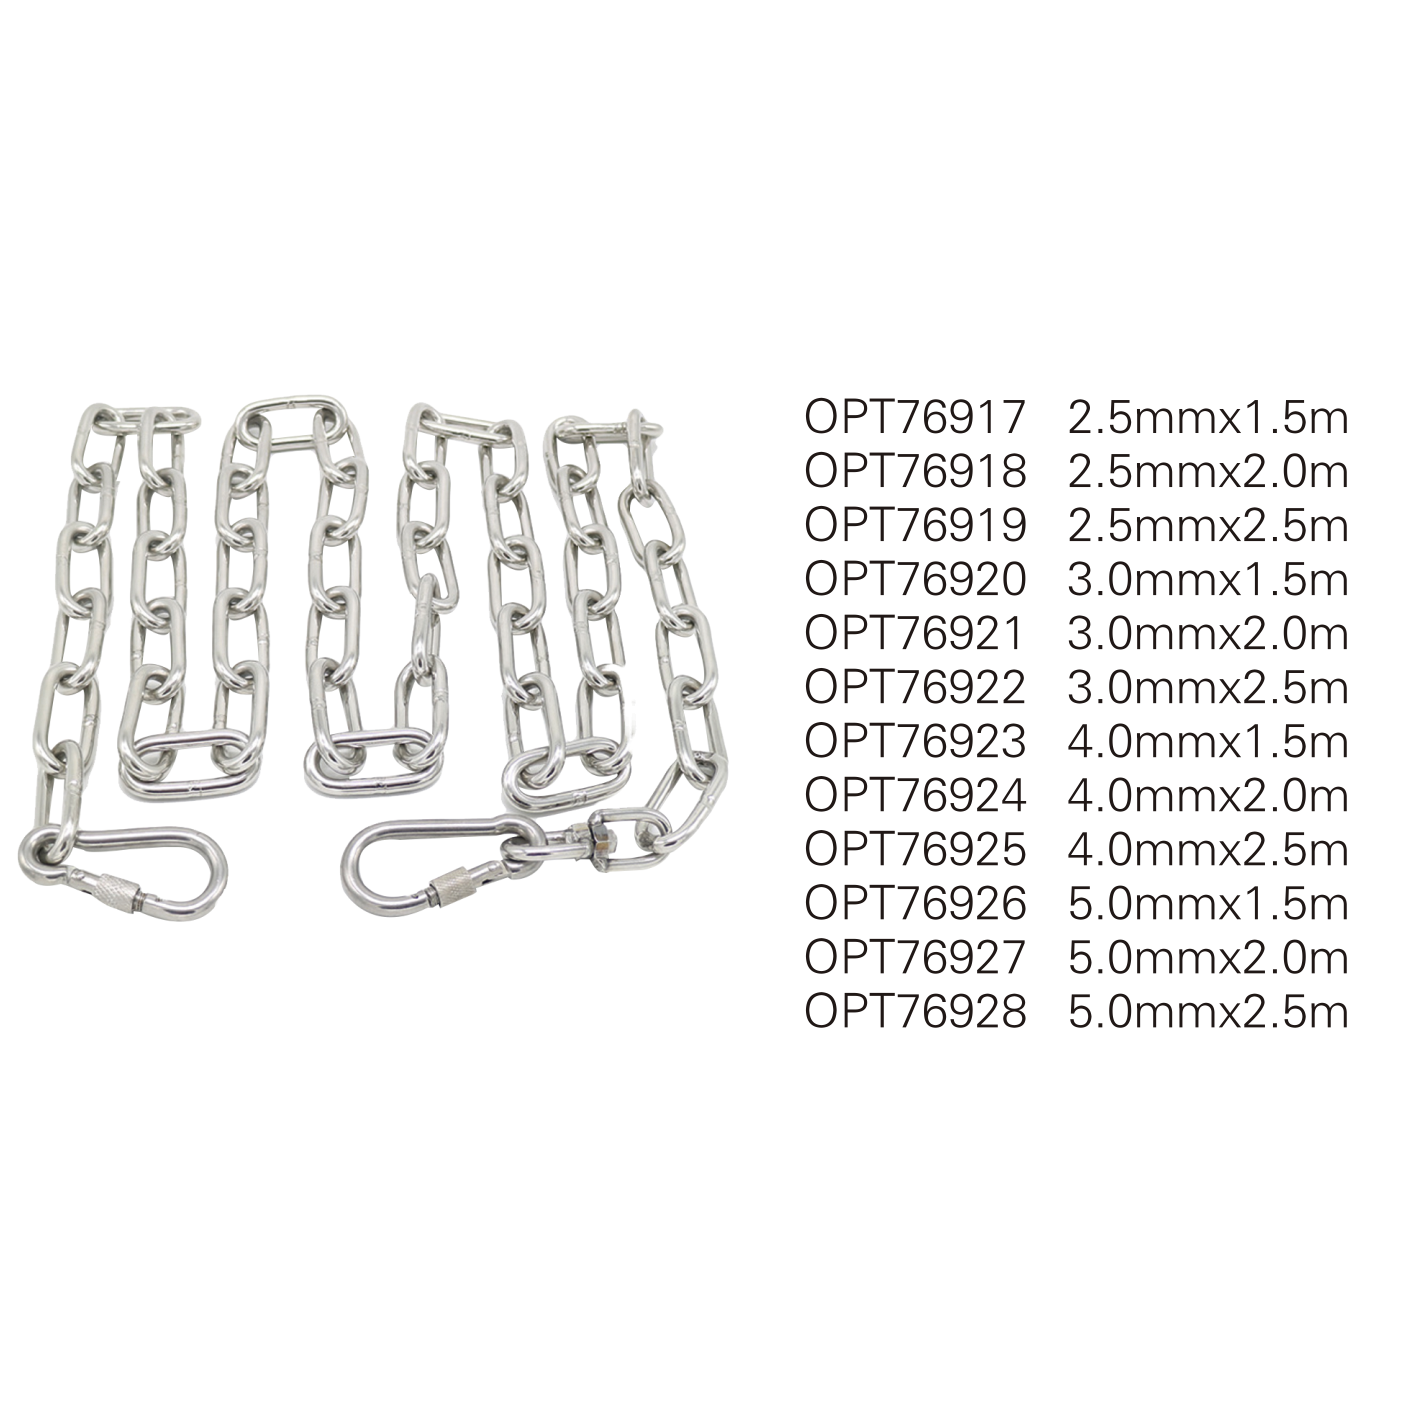 OPT76917-OPT76928 S.S. Chain leads